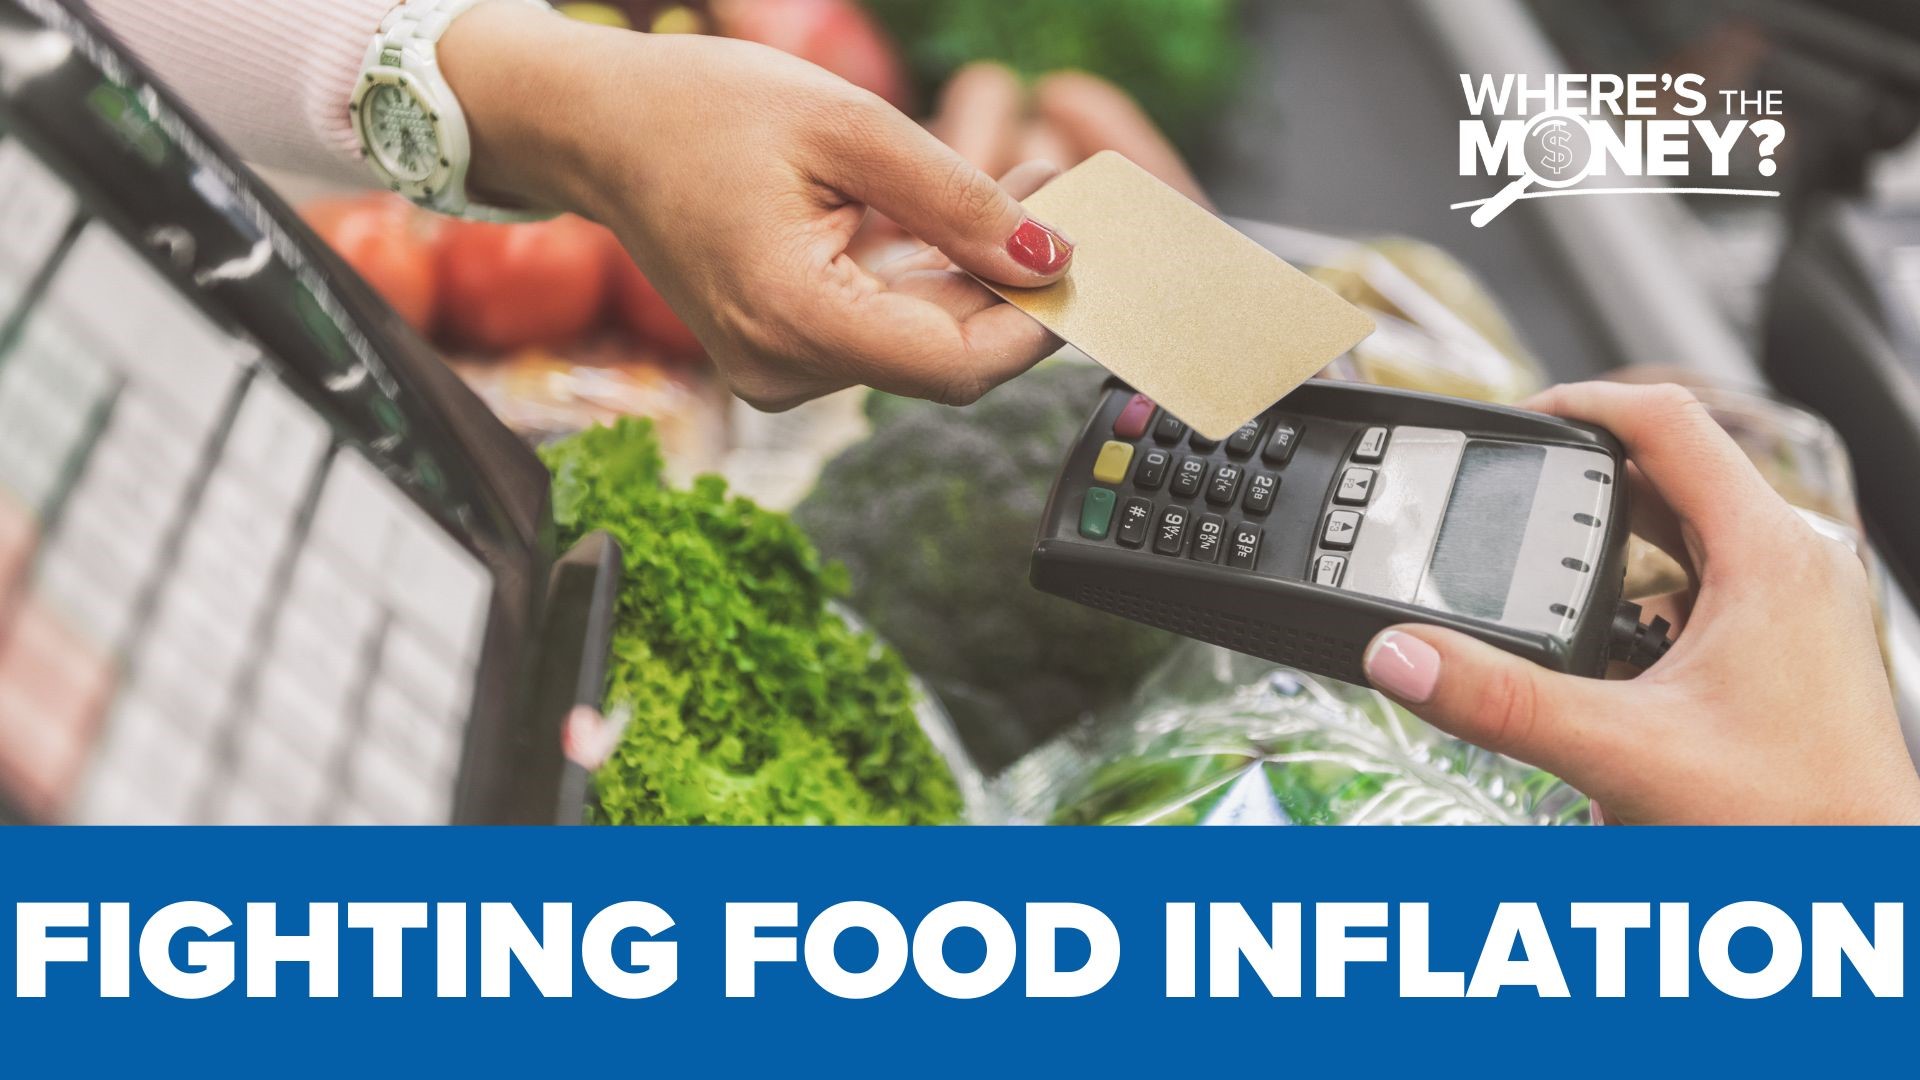 Just when you thought the price of groceries couldn't possibly get any higher, new data shows food costs continue to reach new record highs.